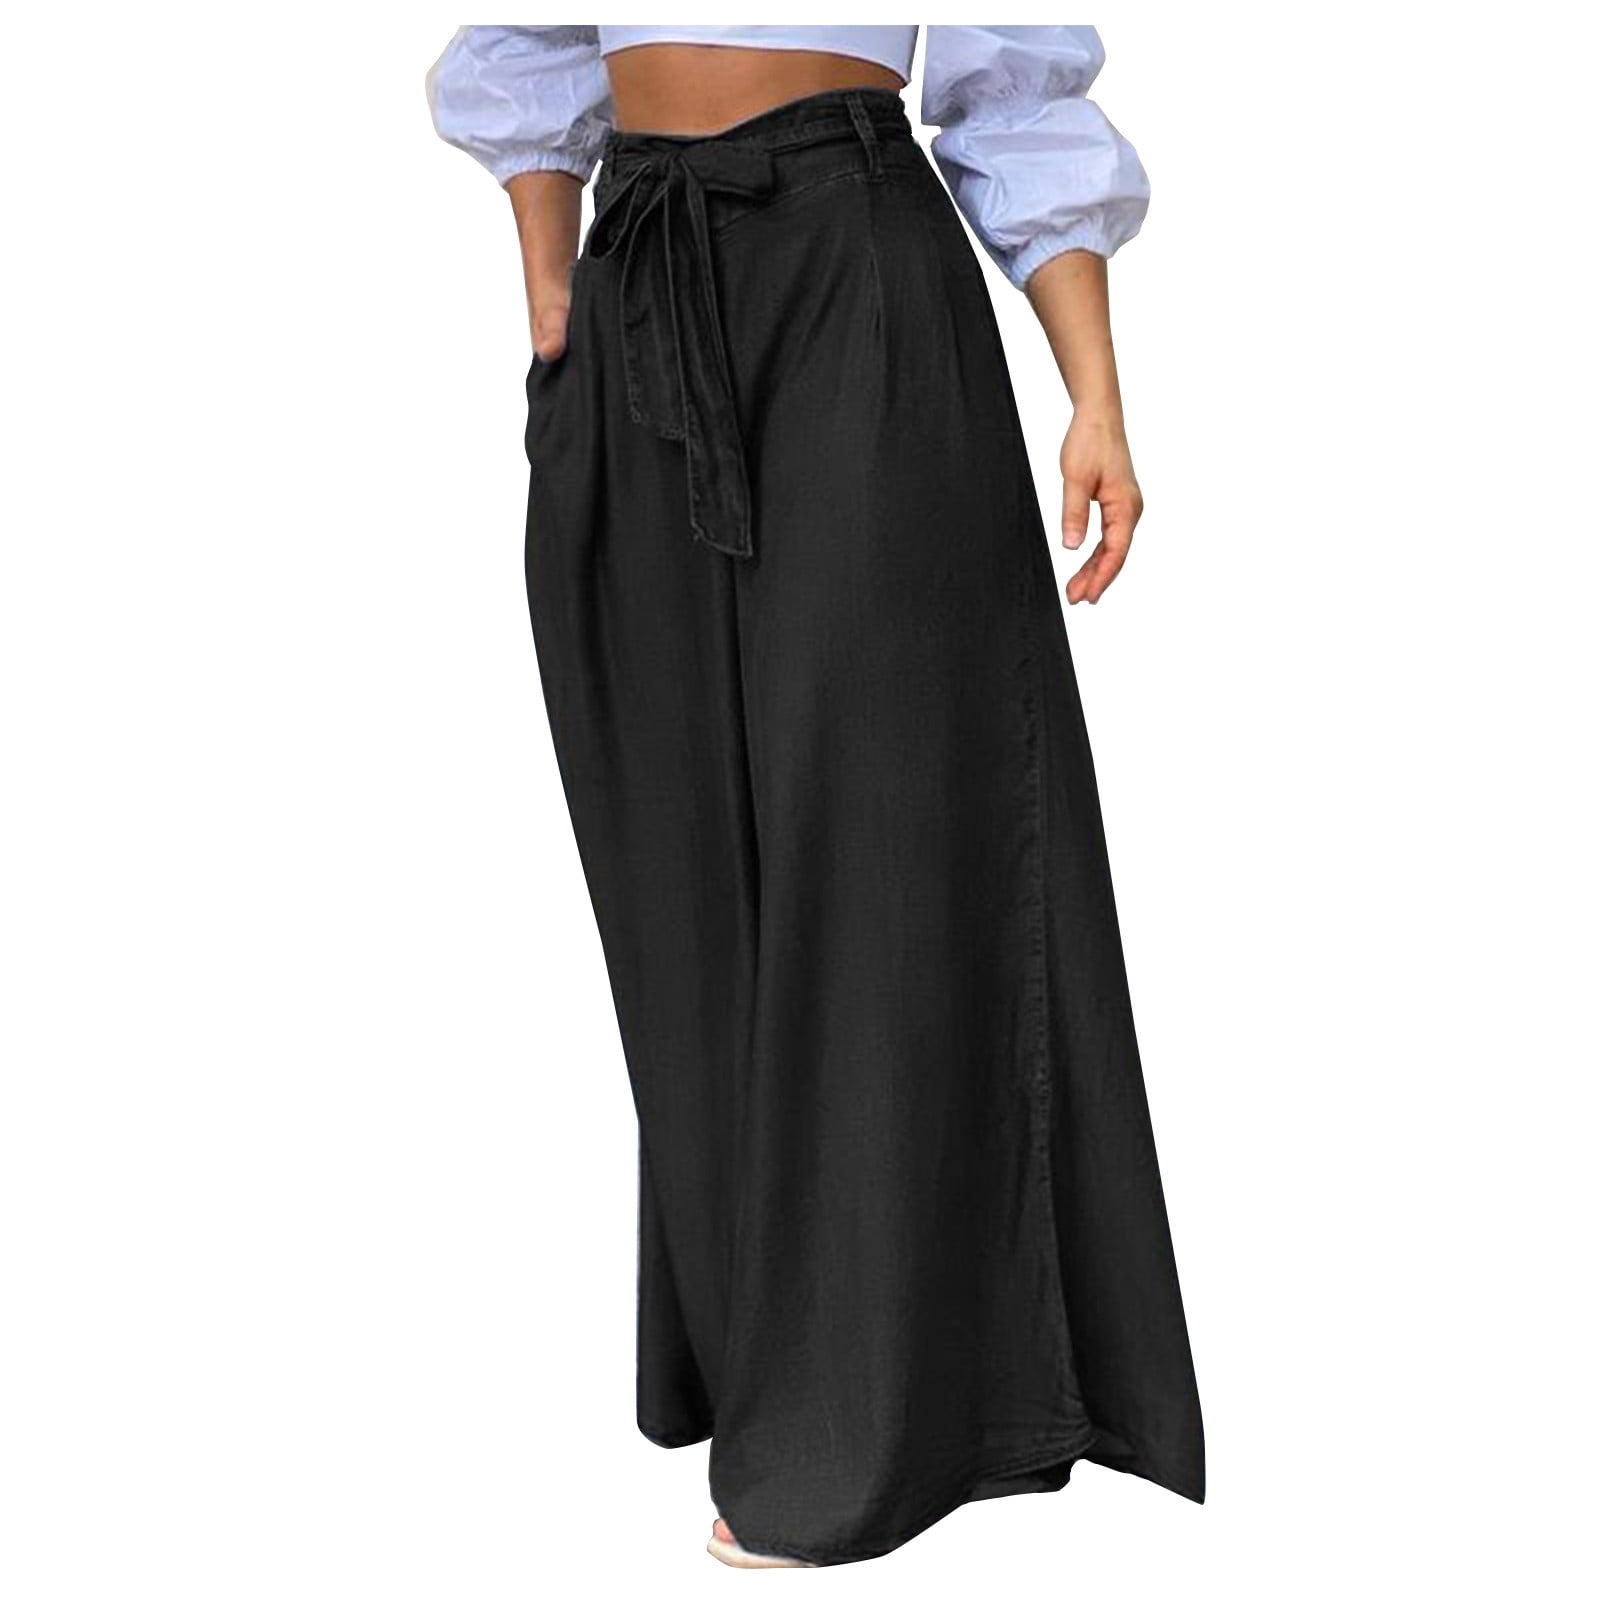 Caracilia Womens Wide Leg Palazzo Pants Summer Beach Boho High Waisted  Adjustable Tie Knot Dressy Flowy Linen Trousers Casual Loose Lounge Pant  with Pockets Black C122A6-heise-S at Amazon Women's Clothing store